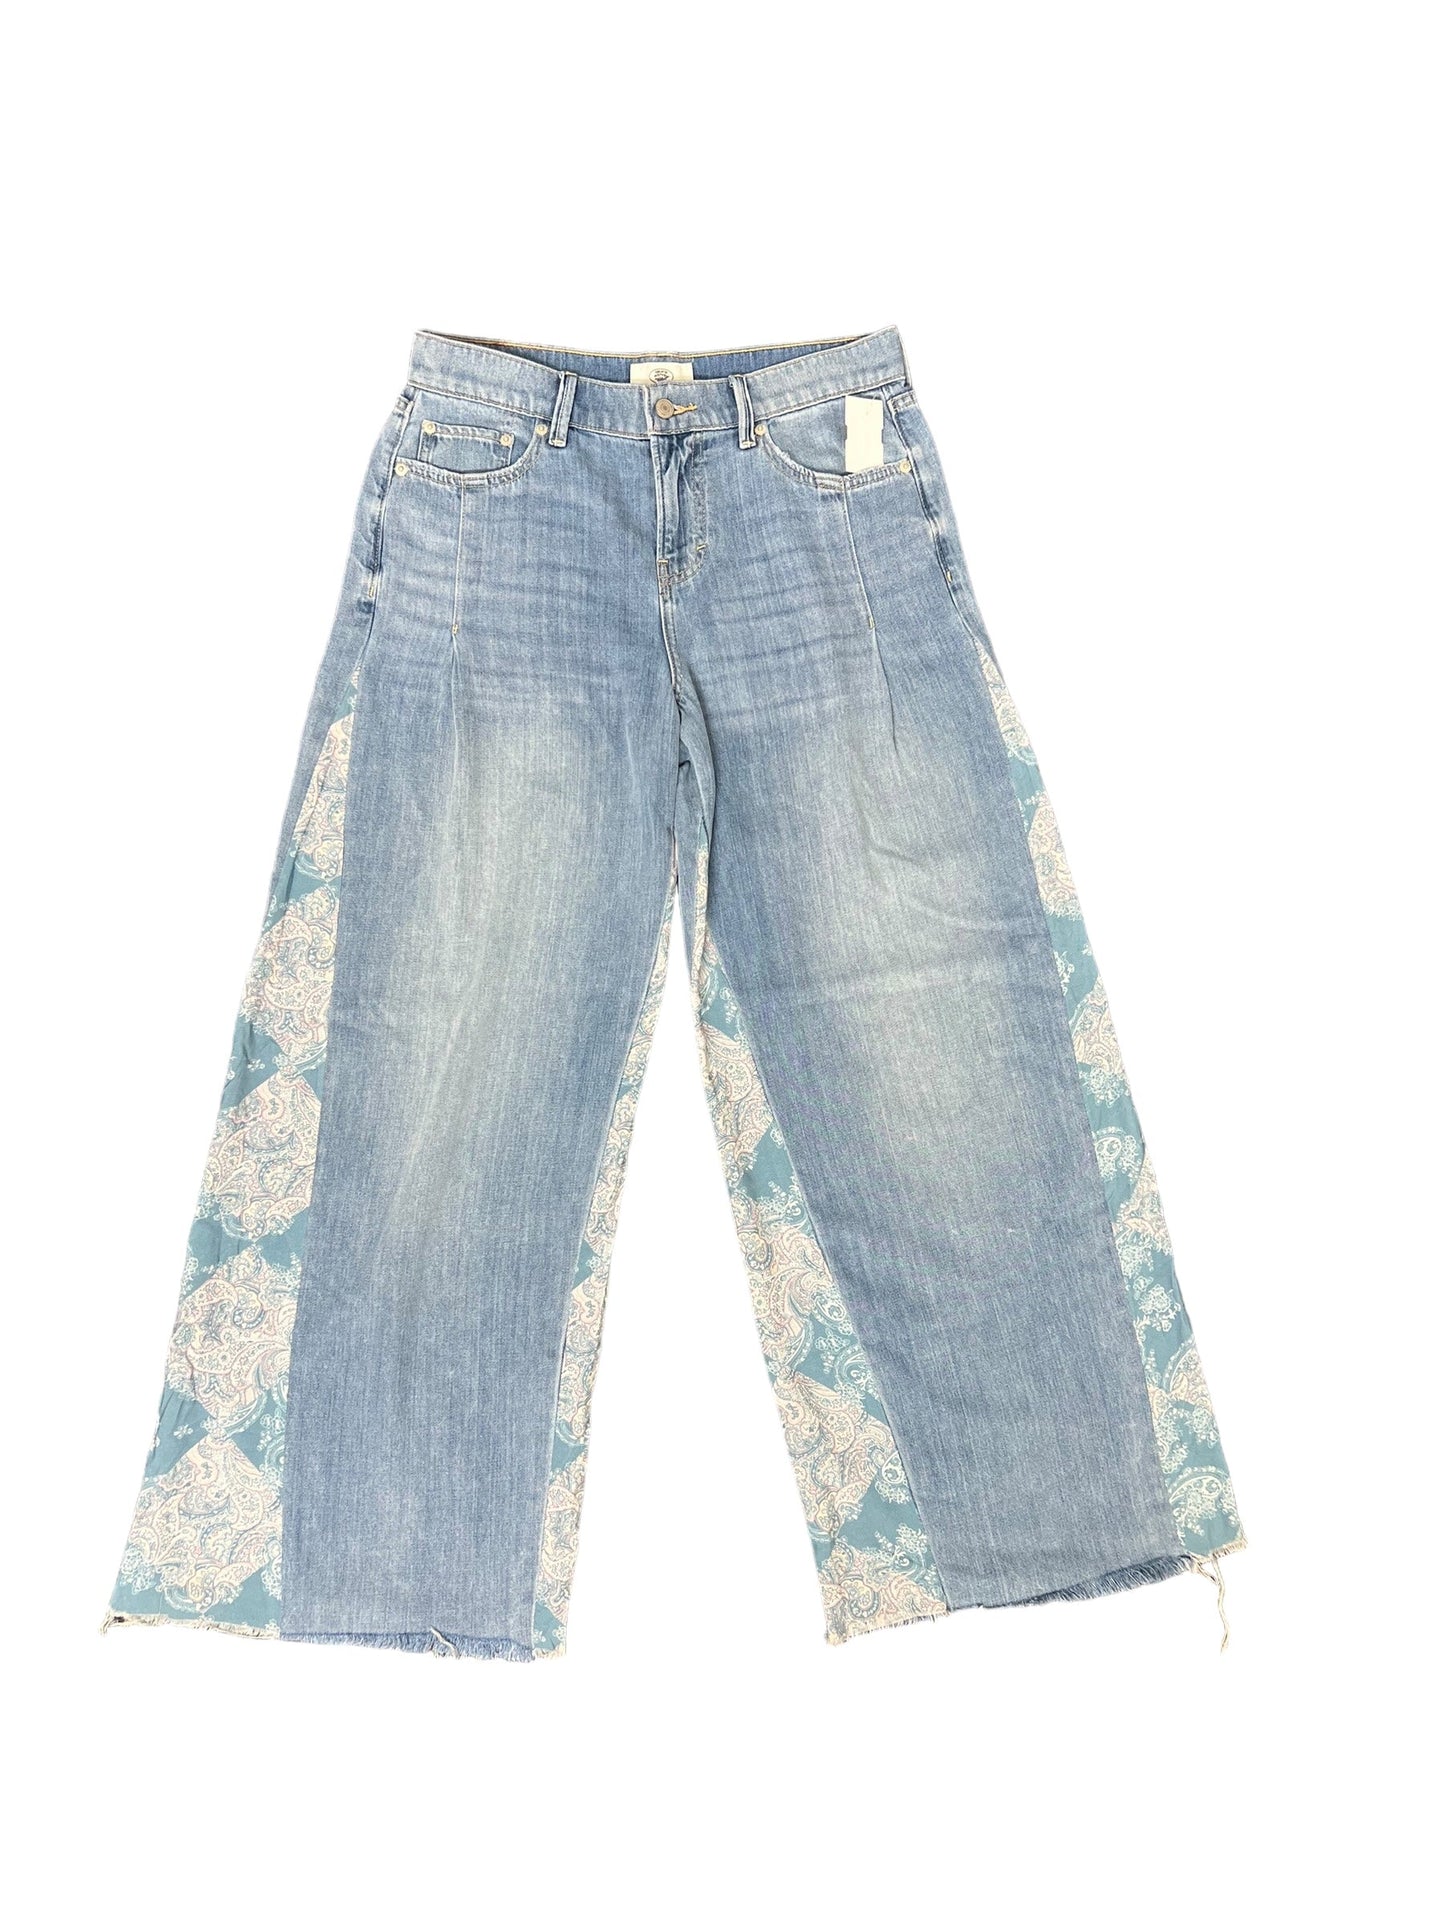 Blue Denim Jeans Flared Lucky Brand, Size 8